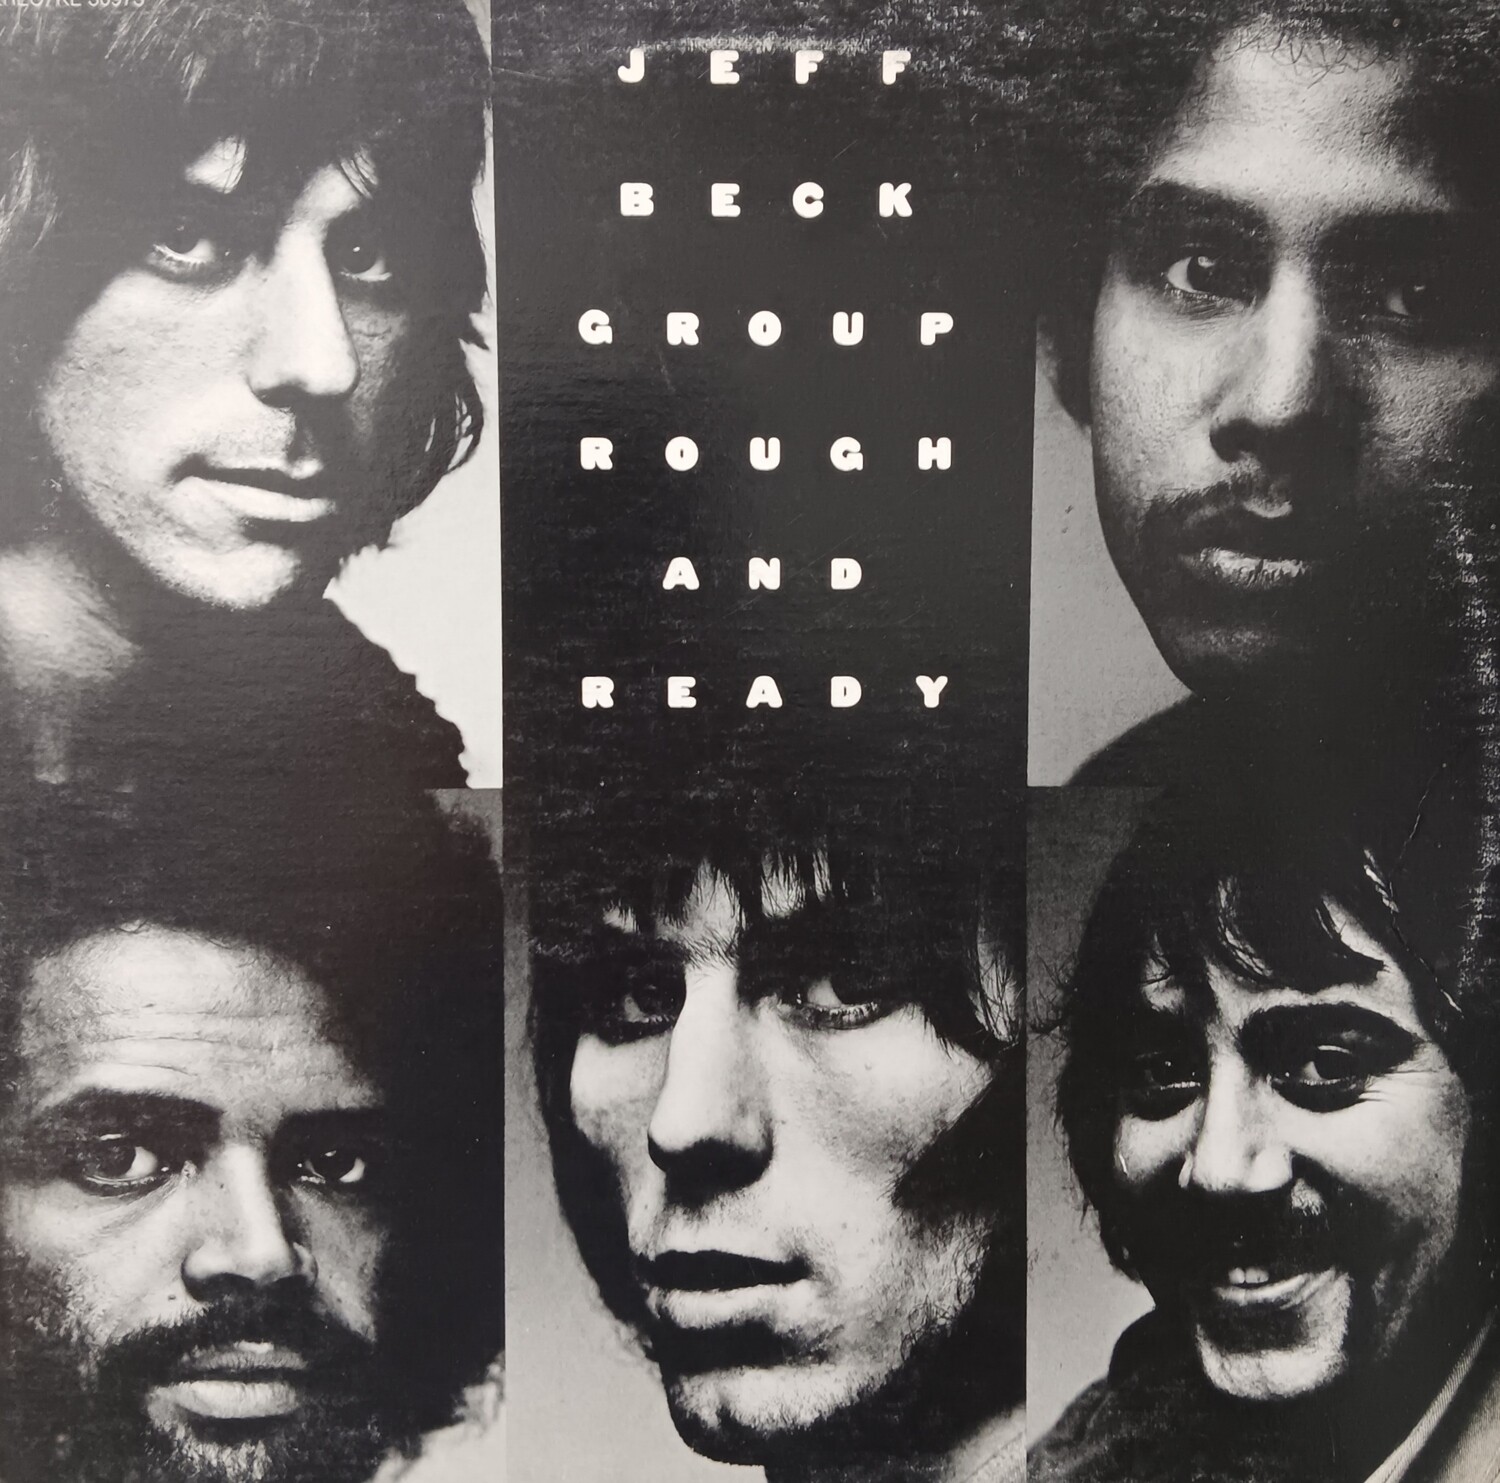 JEFF BECK - Rough and ready